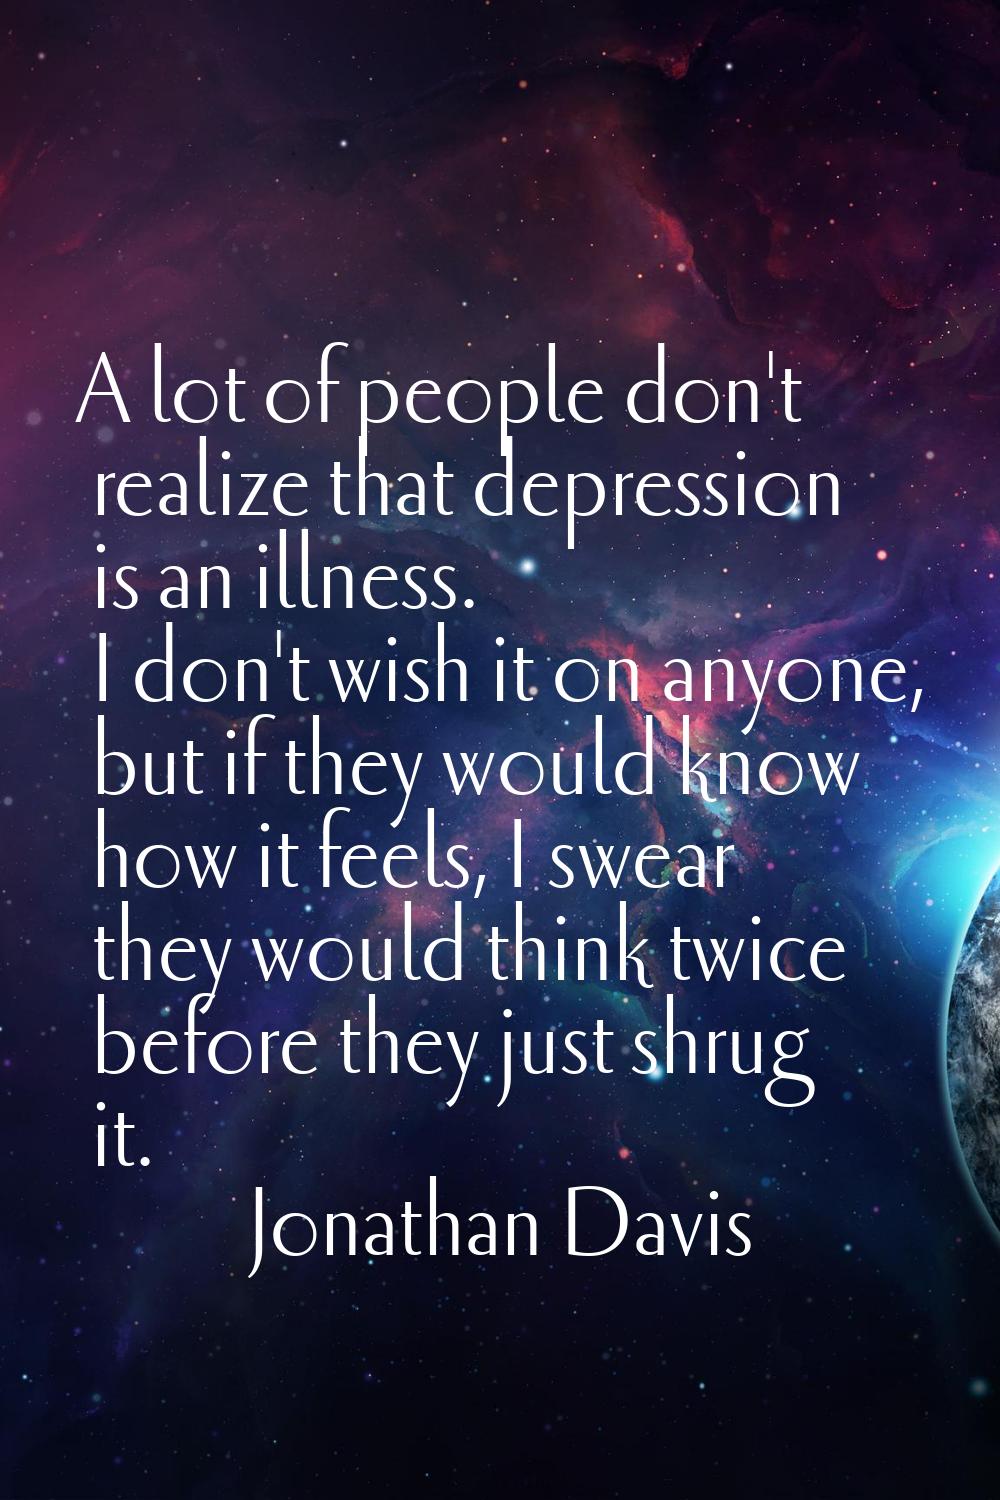 A lot of people don't realize that depression is an illness. I don't wish it on anyone, but if they